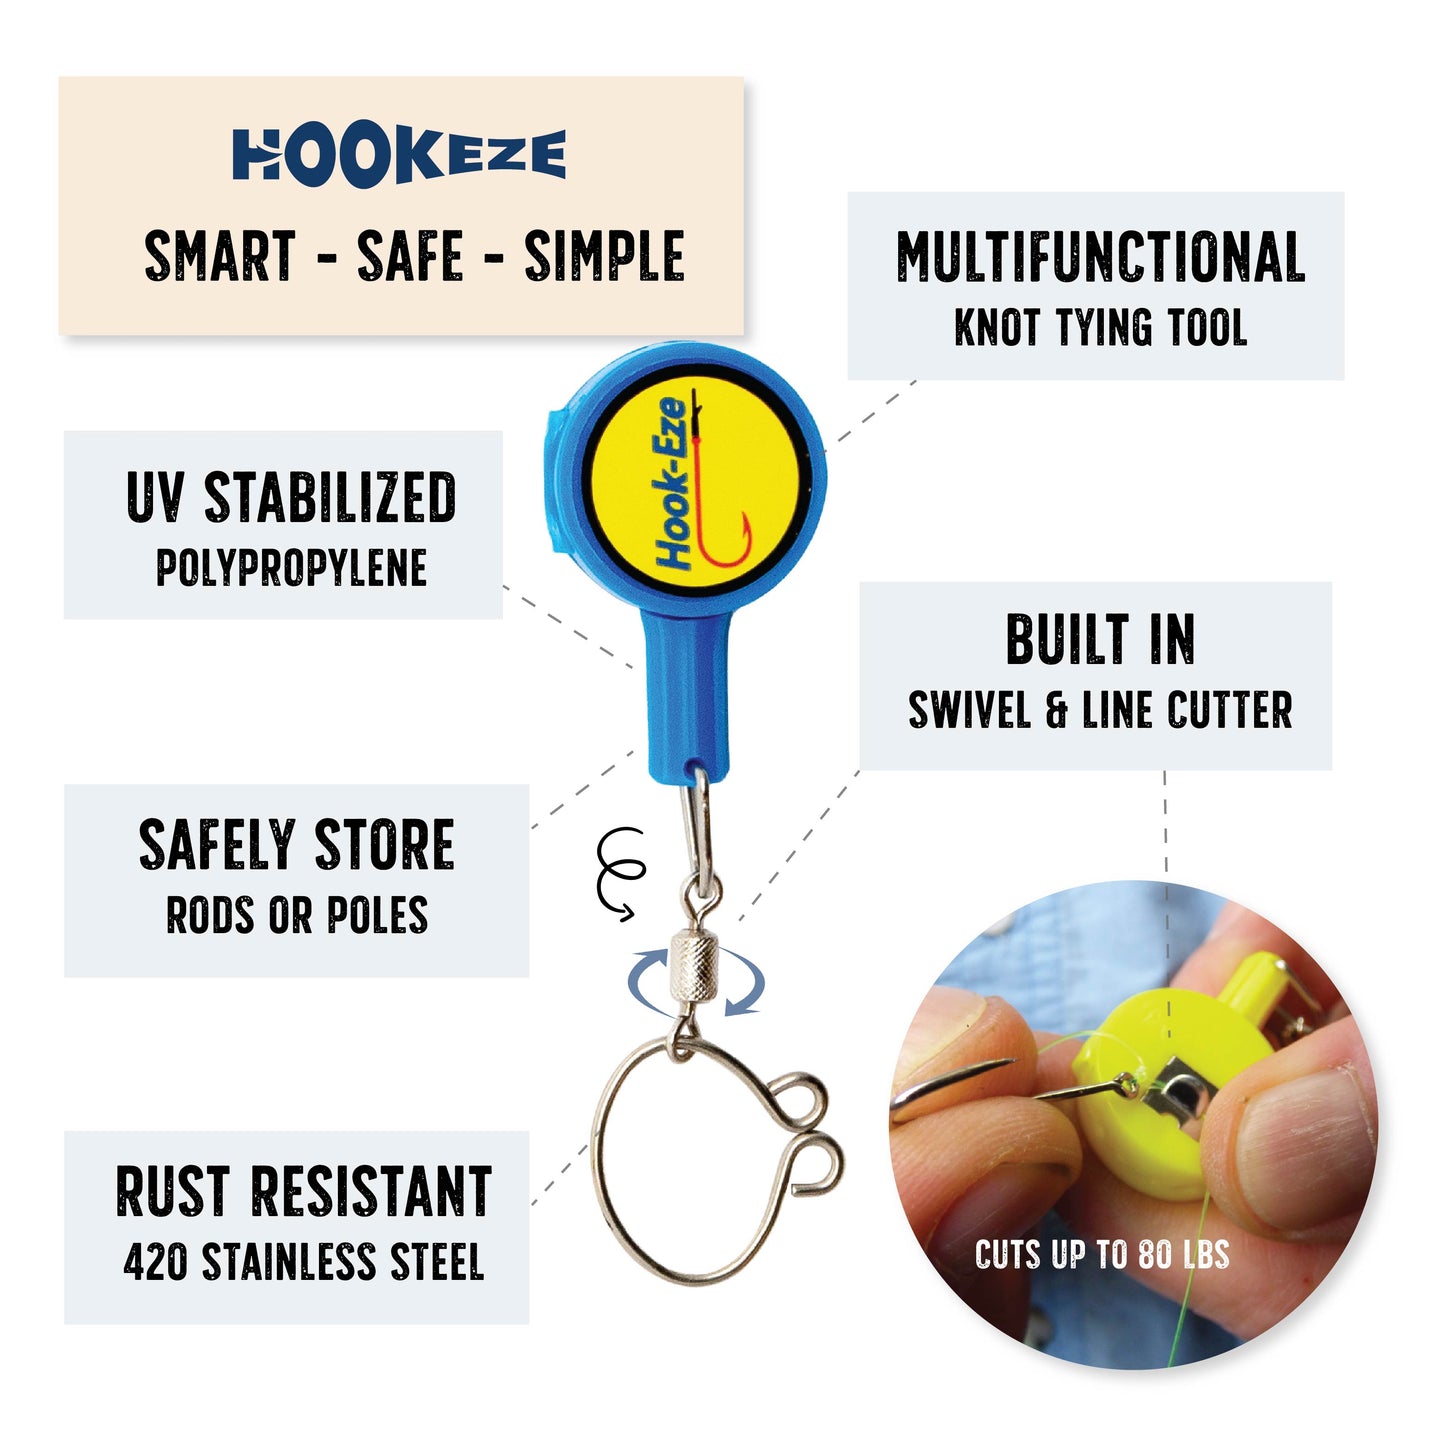 Hook-Eze Fishing Knot Tying Tool (Standard & Large) | Pack of 4